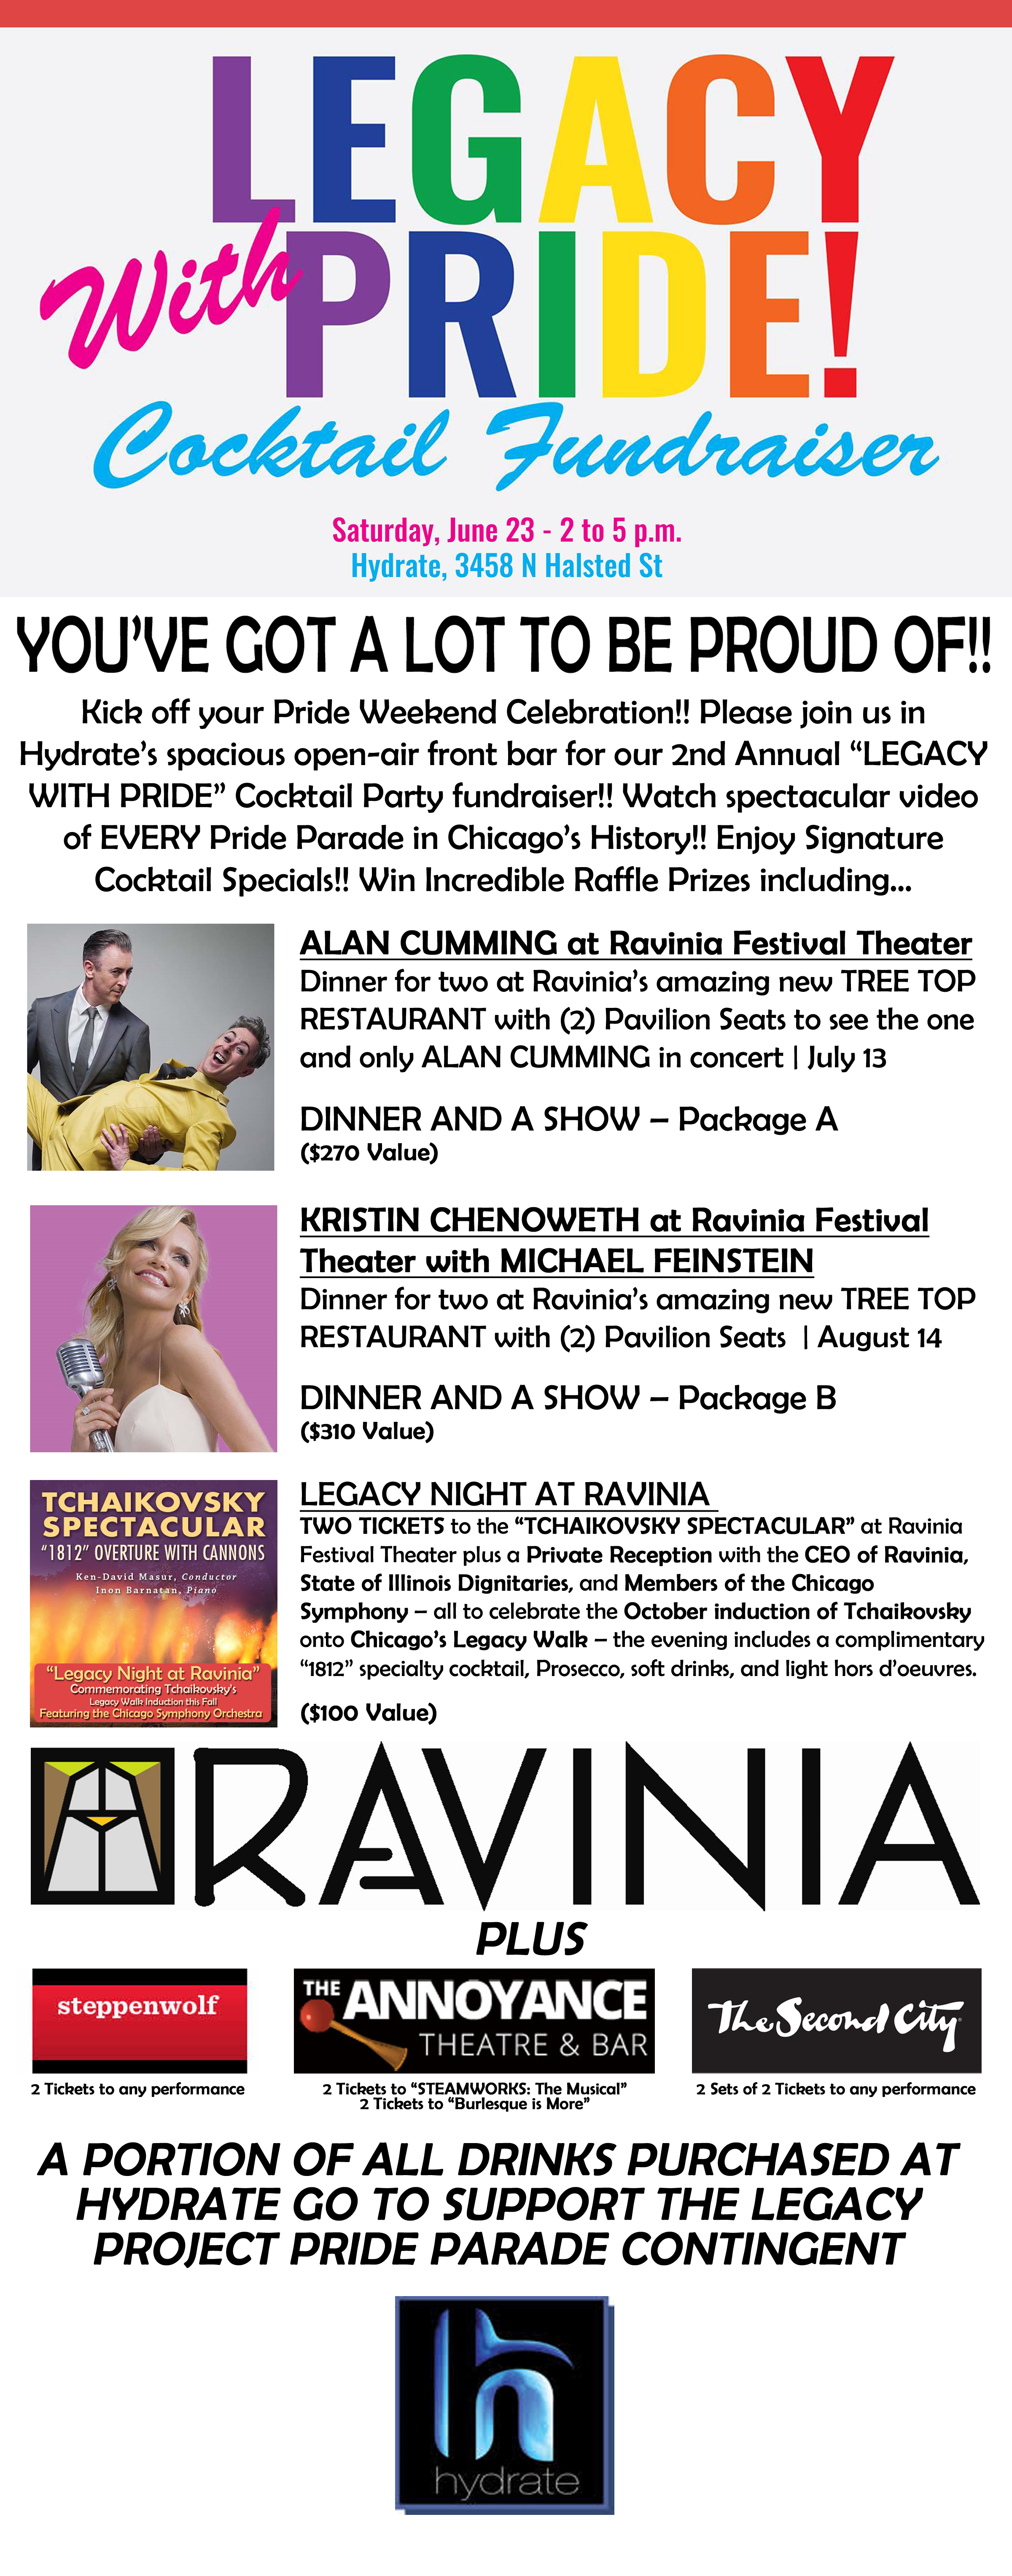 LEGACY PROJECT PRESENTS Legacy With Pride Cocktail Fundraiser at Ravinia 2018